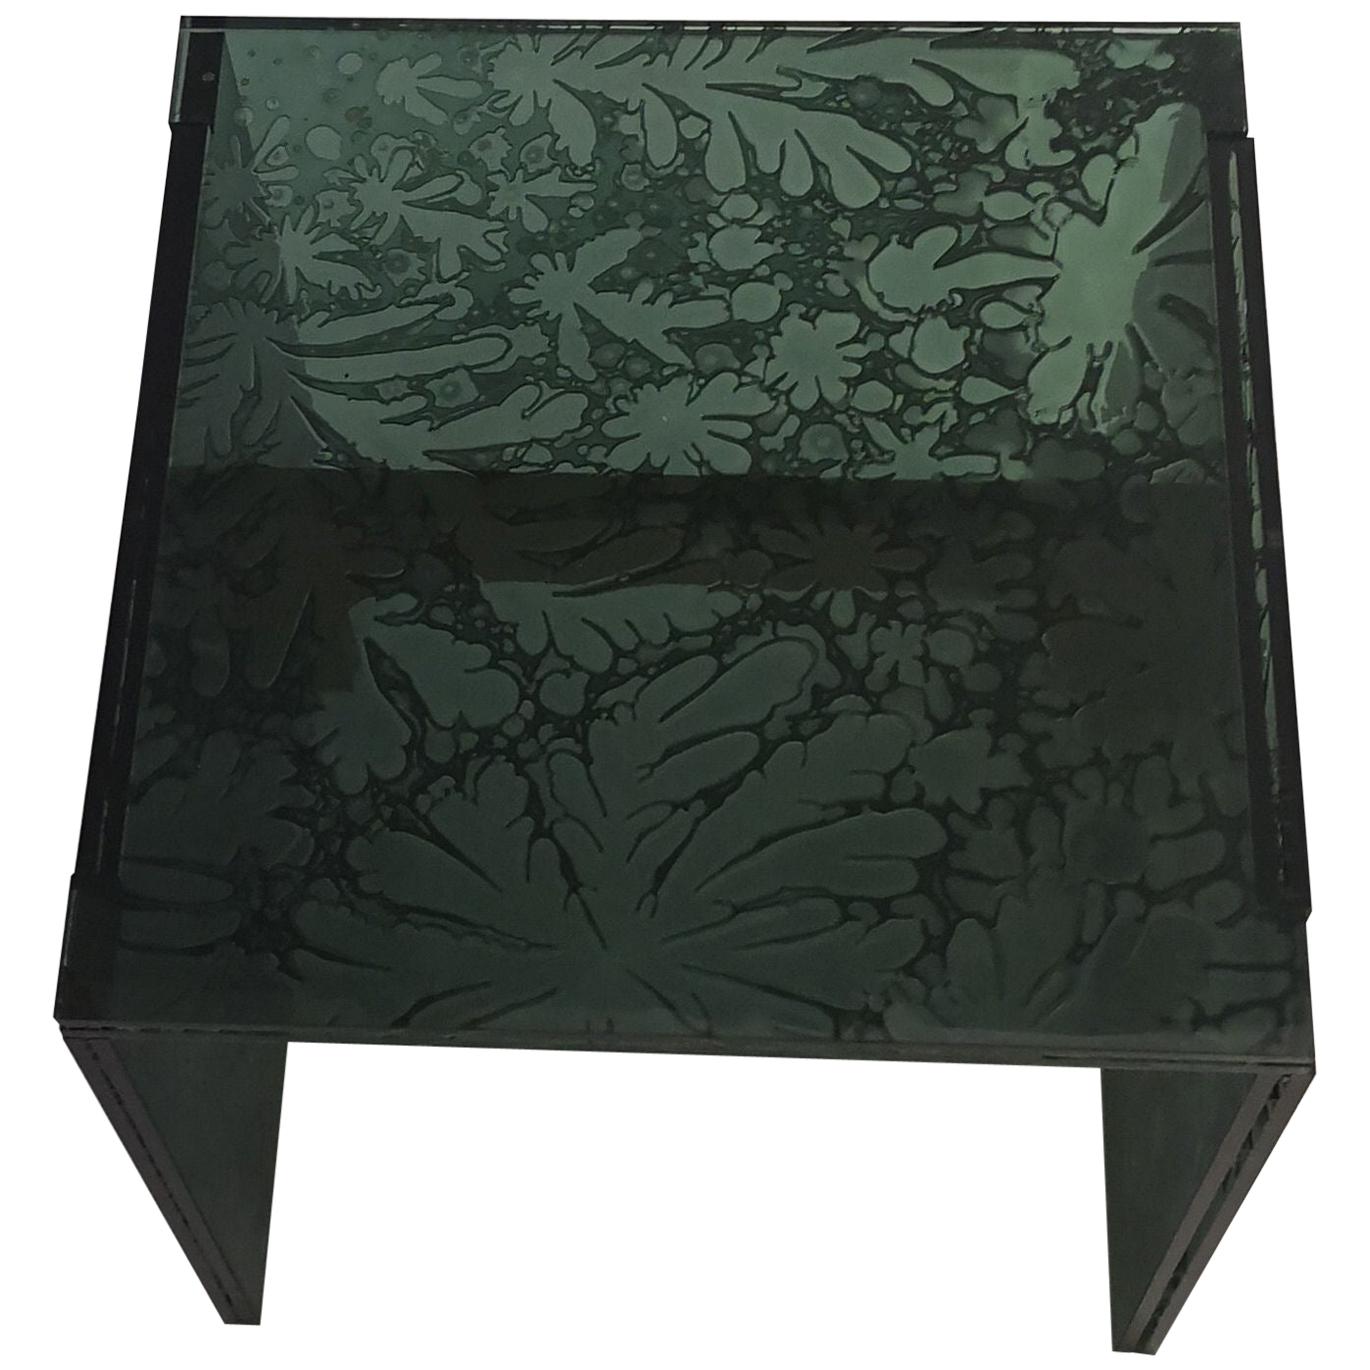 Sketch Quadro Side Table 1 Made of Green Moss Acrylic Des, Roberto Giacomucci For Sale